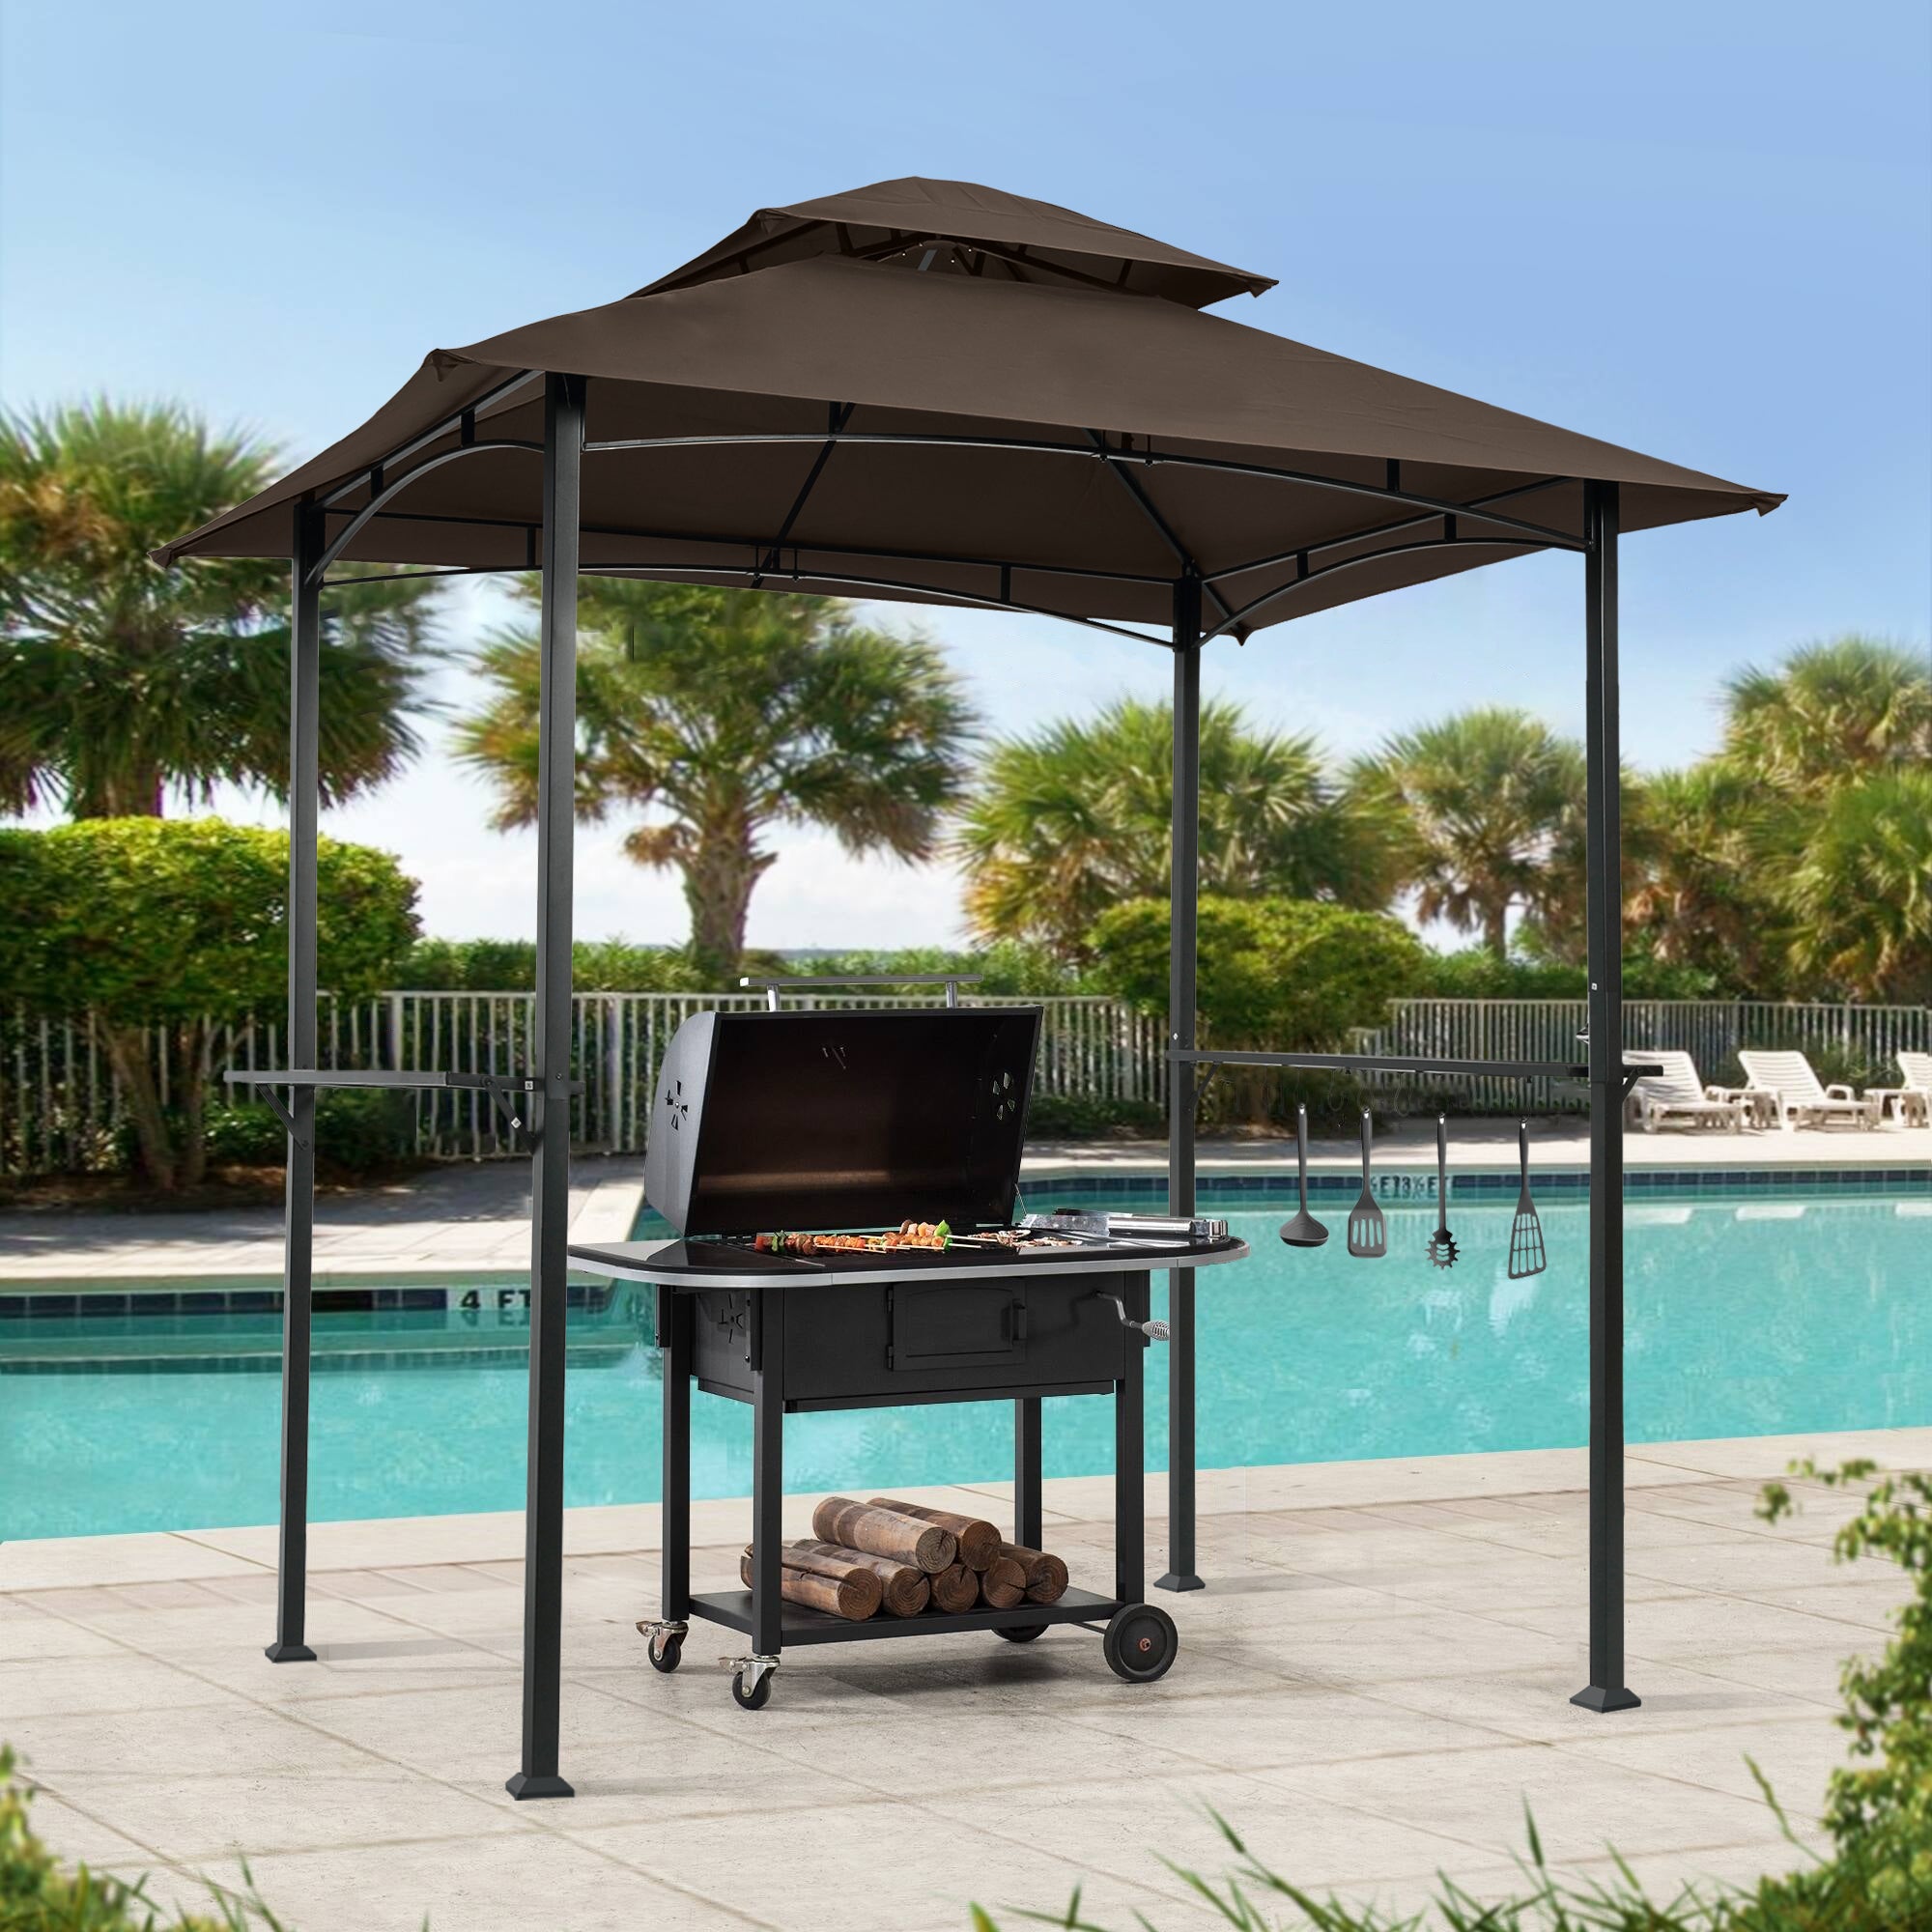 ZNTS Outdoor Grill Gazebo 8 x 5 Ft, Shelter Tent, Double Tier Soft Top Canopy Steel Frame with hook 87754137